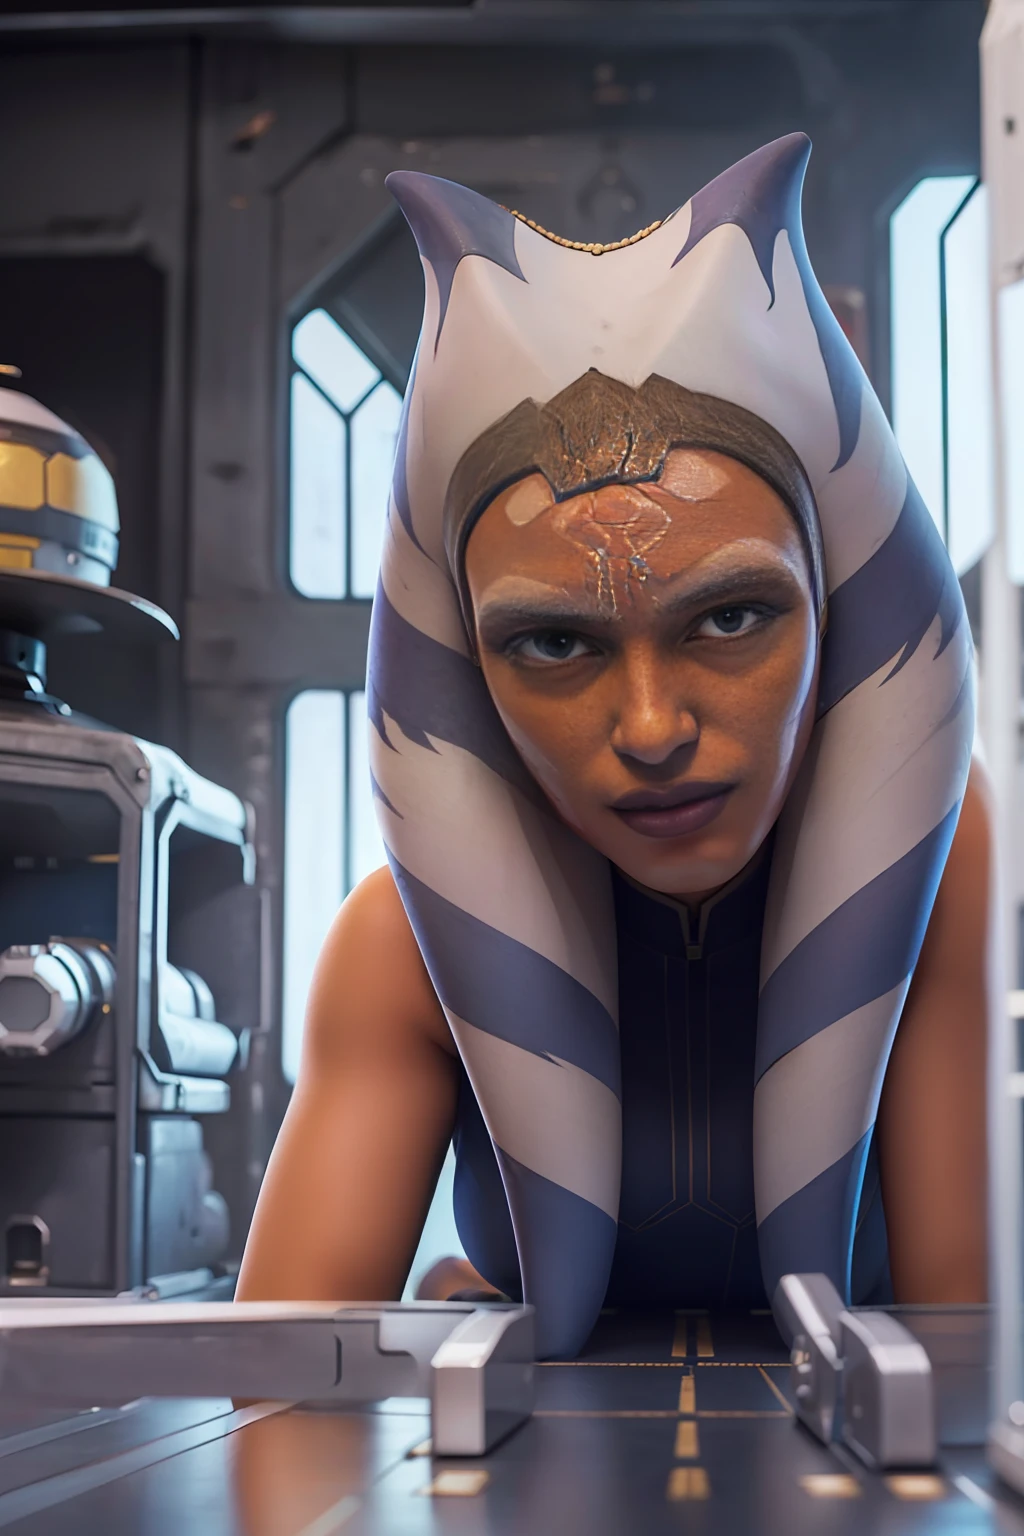 Ahsoka Tano, (fotorrealisitic, Highresolution: 1.4), ((Swollen Eyes)), gazing at viewer, , fully body (8K, Foto RAW, best qualityer, Masterpiece artwork: 1.2), (realisitic, realisitic: 1.37), (sharp-focus: 1.2), Professional  lighting, photon mapping, radiosity, physics-based render, (orange fur: 1.2), (breasts small: 1.2), gazing at viewer, portraite, blue colored eyes, (background inside spacecraft: 1.4),  soli, upperbody, realisitic, (Masterpiece artwork: 1.4), (best qualityer: 1.4), (shining skin), serious (Scrawny, cloused mouth, focused: 1.3), (On her feet: 1.1), medium bust, struggling pose,